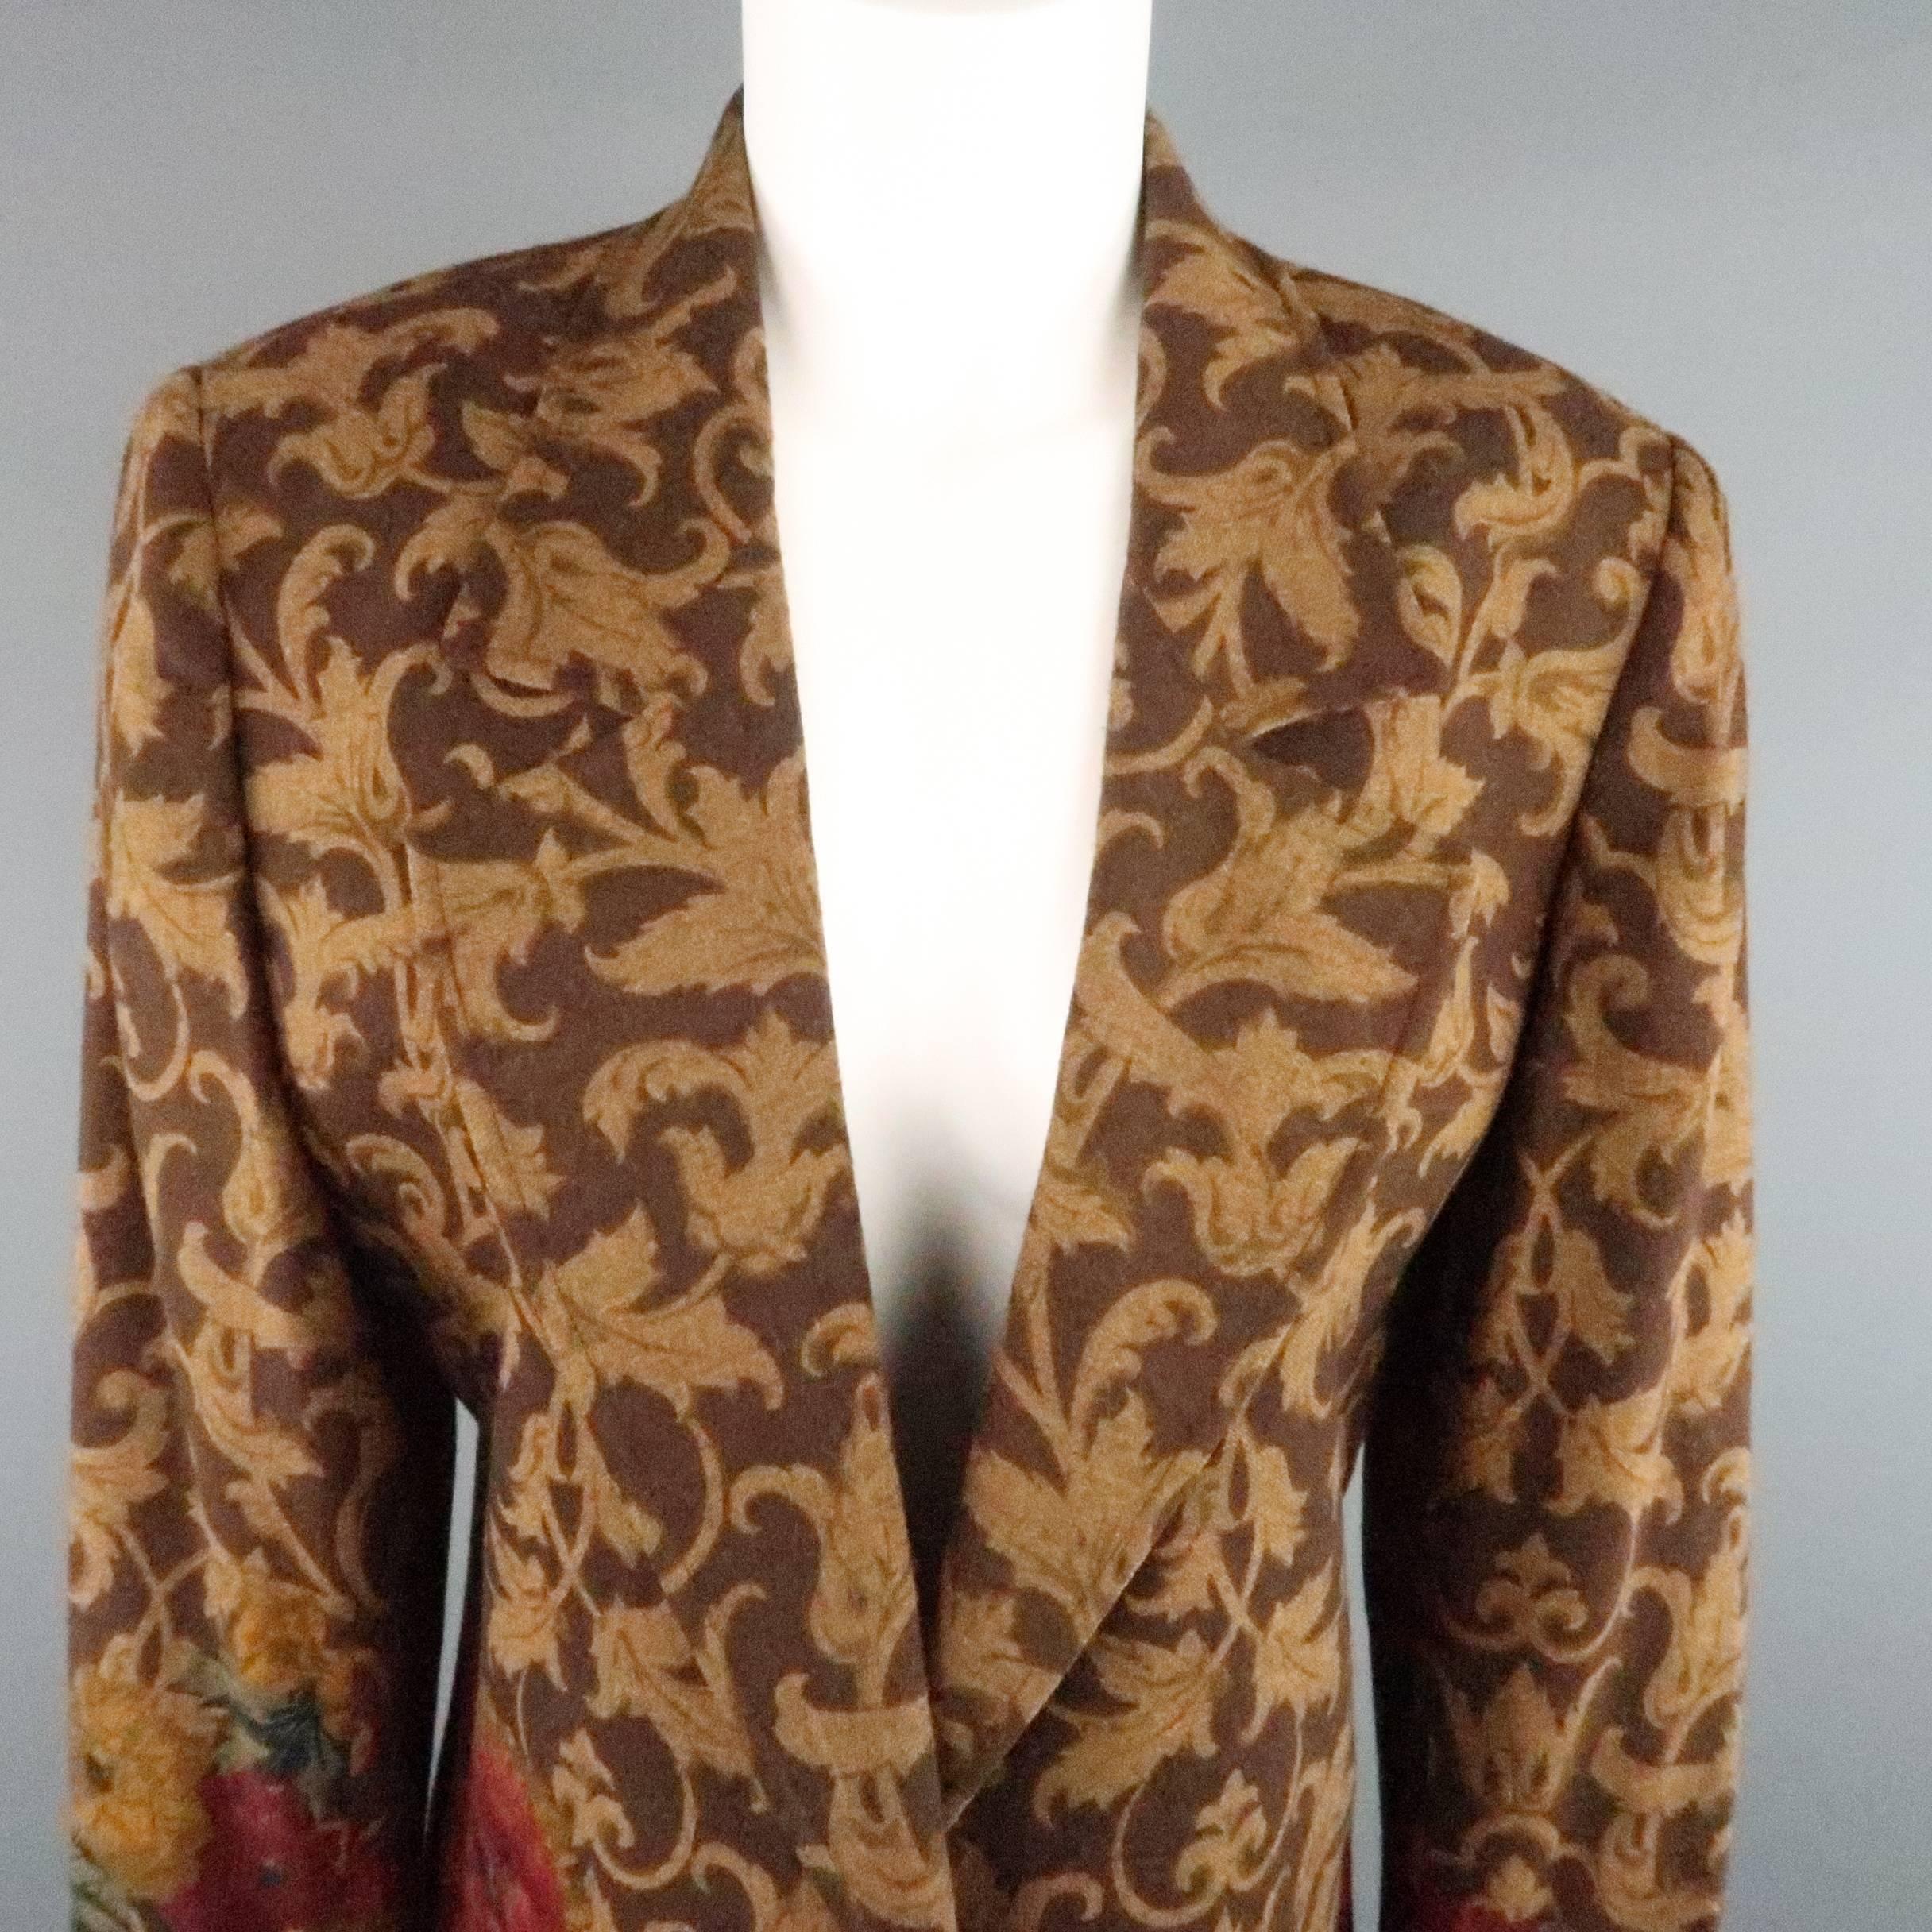 Vintage 1990's VALENTINO Miss V blazer comes in a gorgeous brown and tan baroque print wool with red rose floral print lower mid section and features an open front, wide notch lapel, slit pockets, and satin liner. Made in Italy.
 
Good Pre-Owned